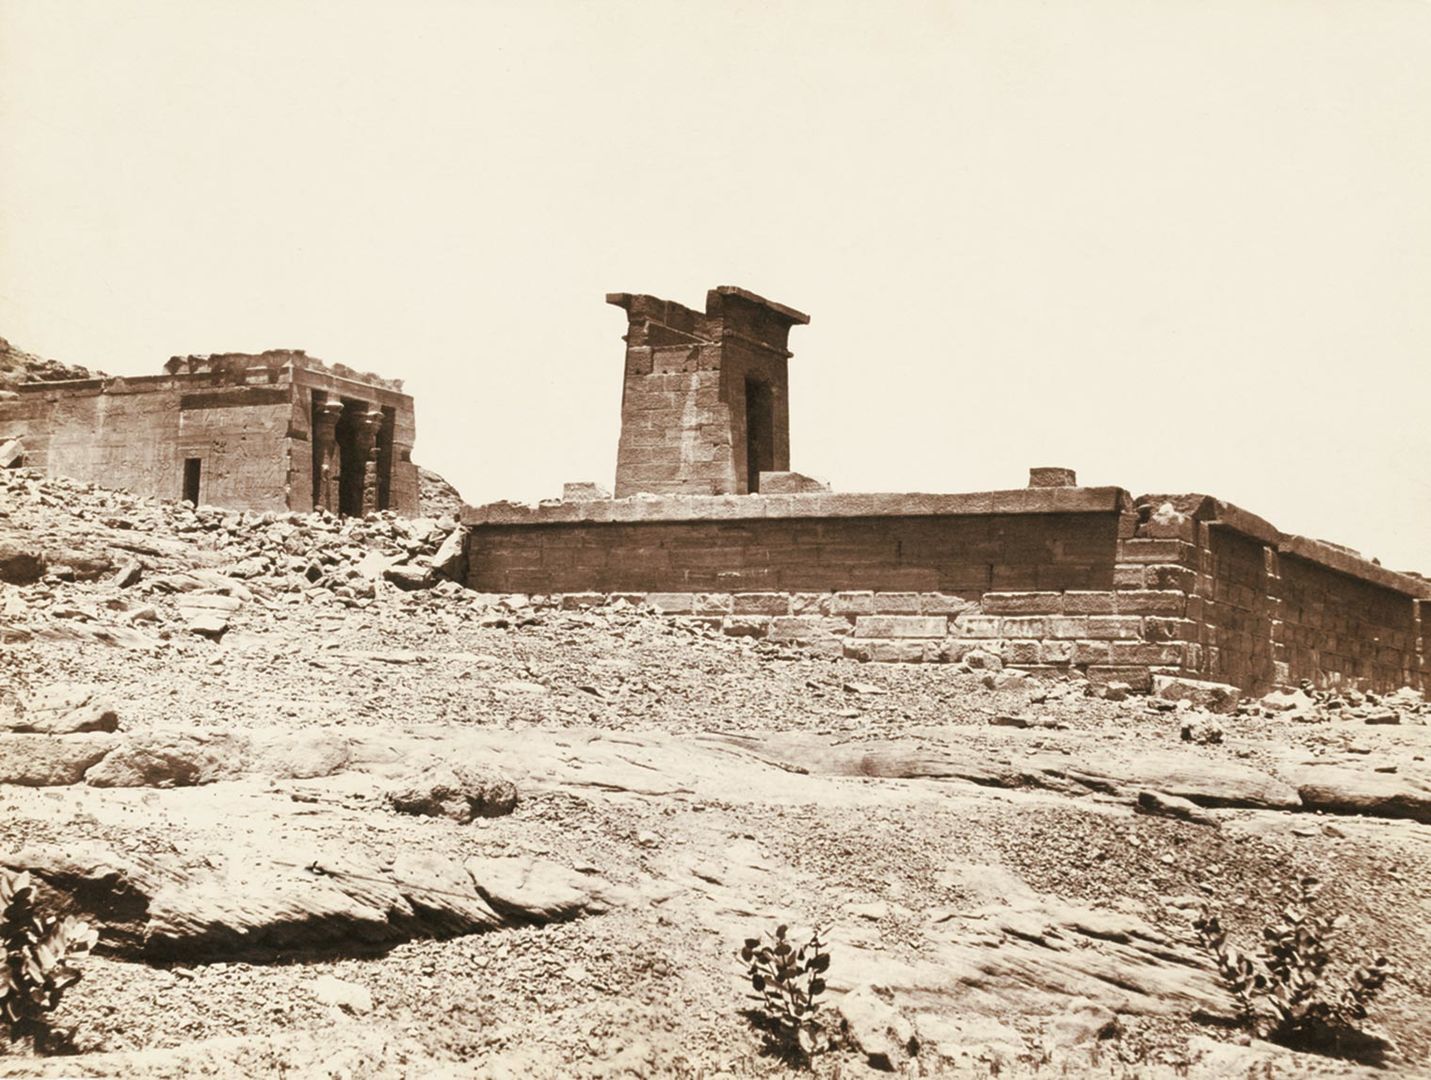 An archival photo of the Temple of Dendur in its original location in Egypt